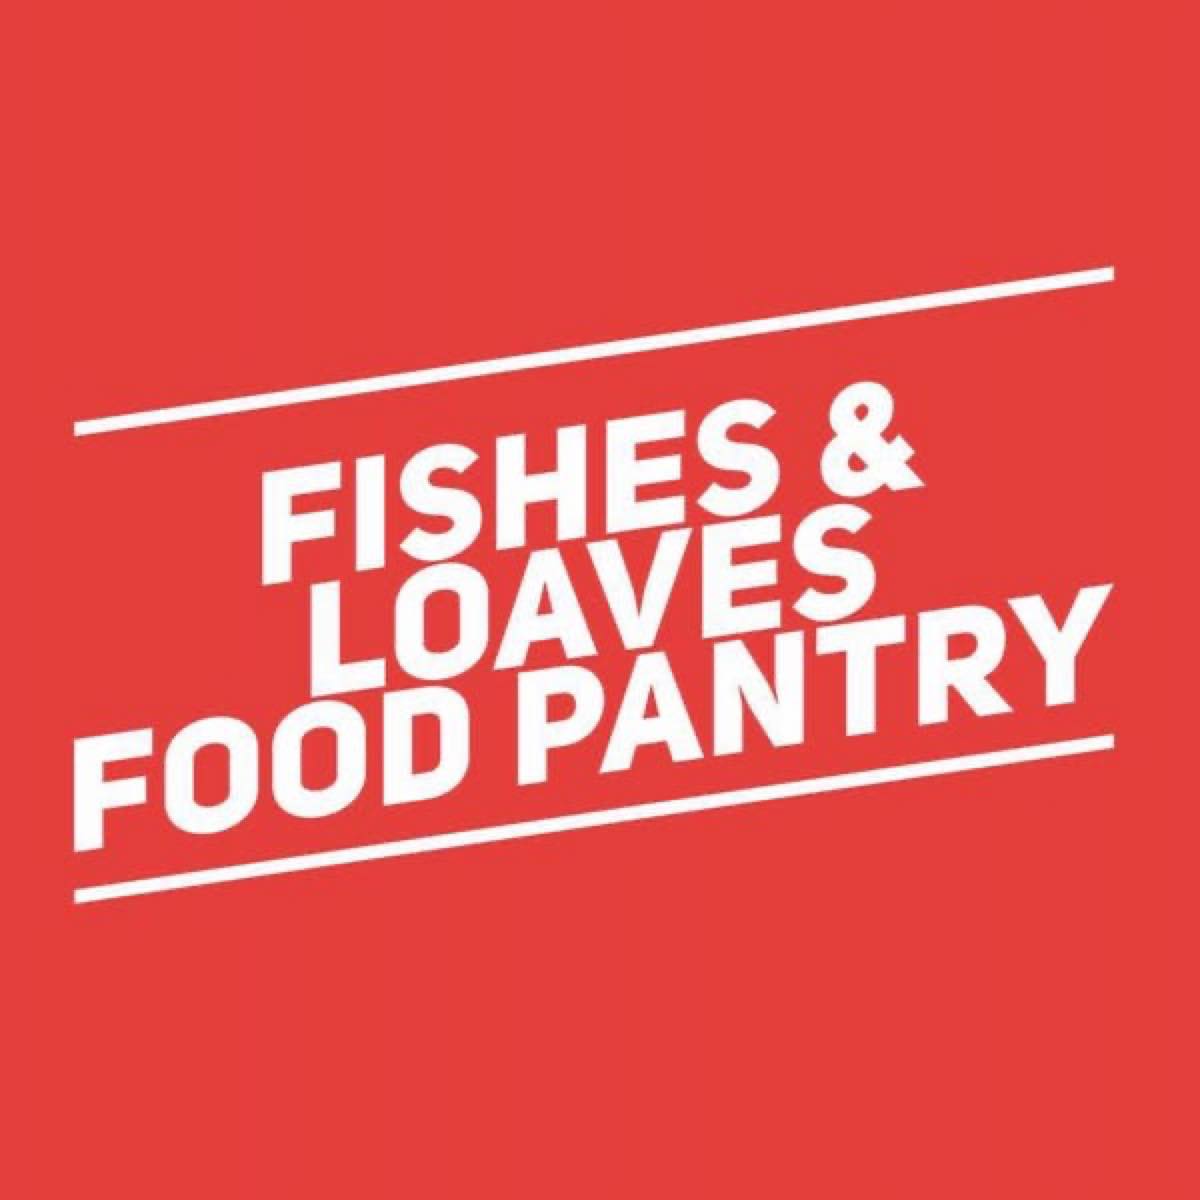 Fishes and Loaves Food Pantry at Good Shepherd Church 